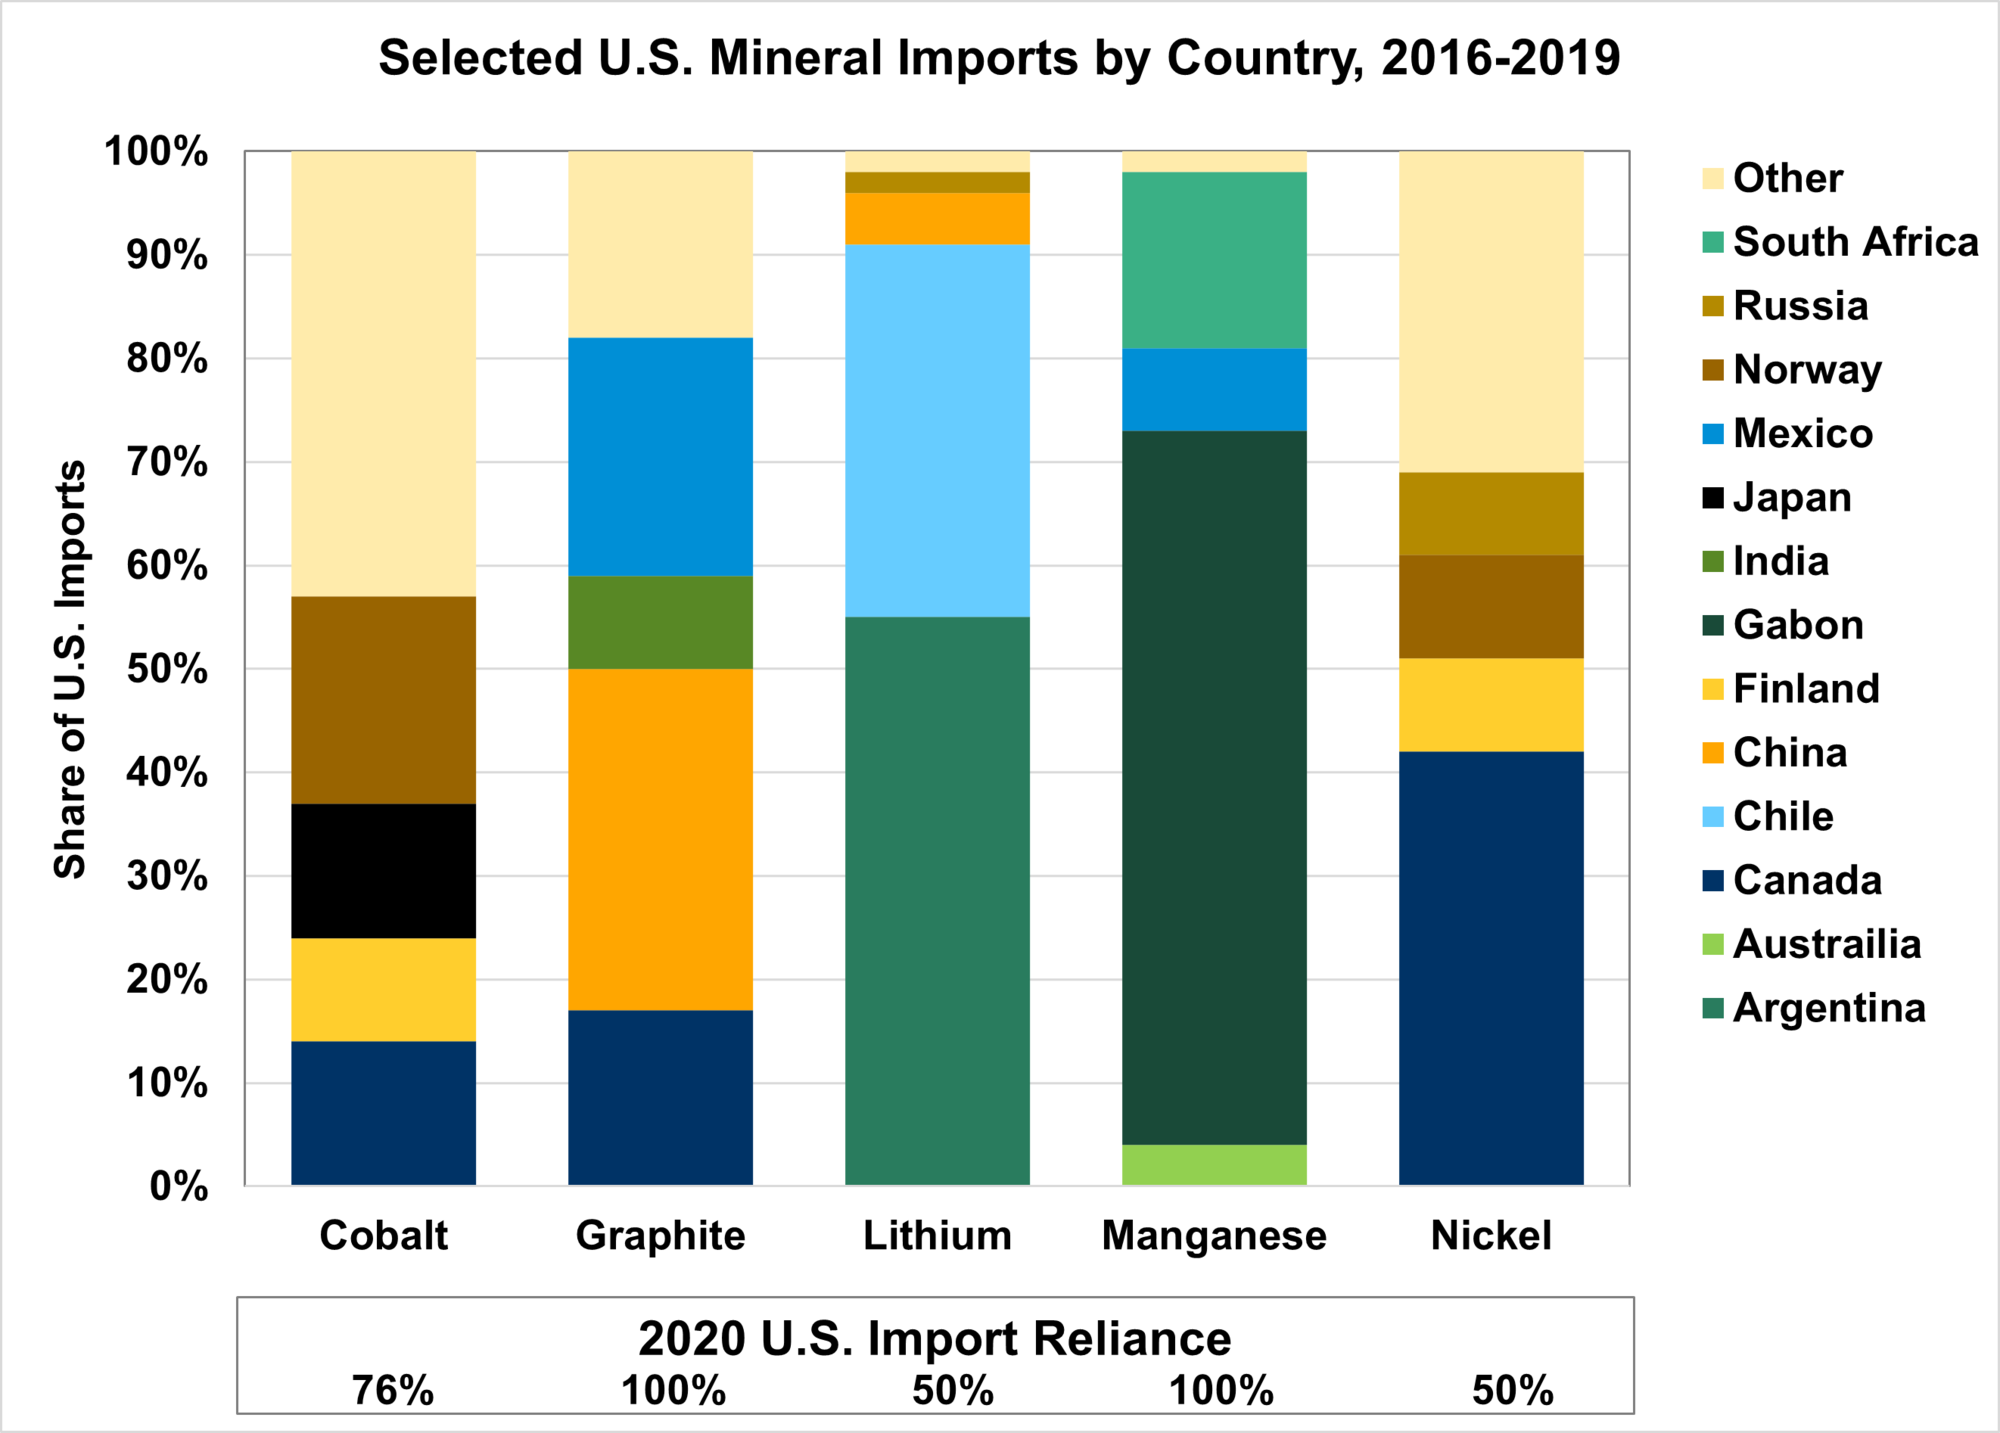 Selected U.S. Mineral Imports by Country, 2016-2019